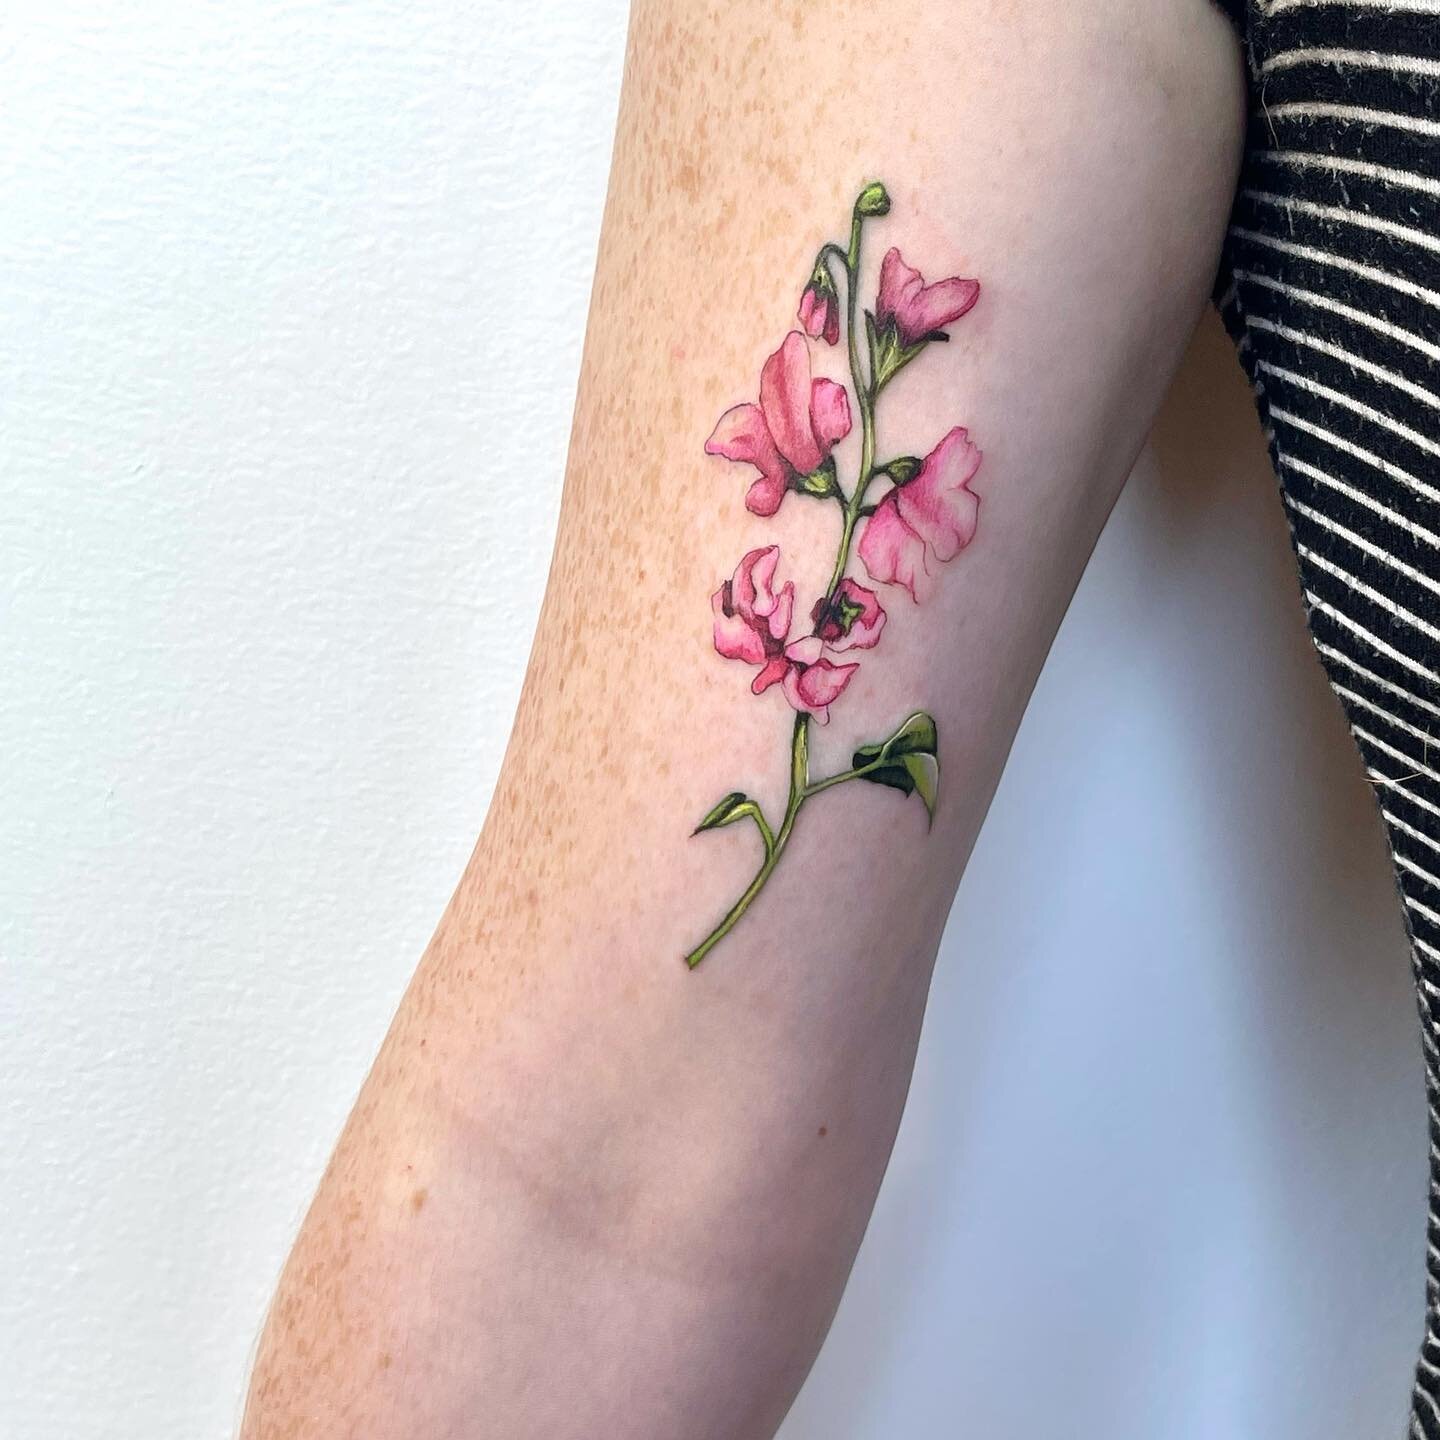 a delicate sweet pea flower 🌸 thank you so much, Brittany! @practical_hippies 

also so happy to announce that the official @evergreenstudios.chicago Instagram is up! go head over and give it a follow! so awesome to watch firsthand as the incredibly